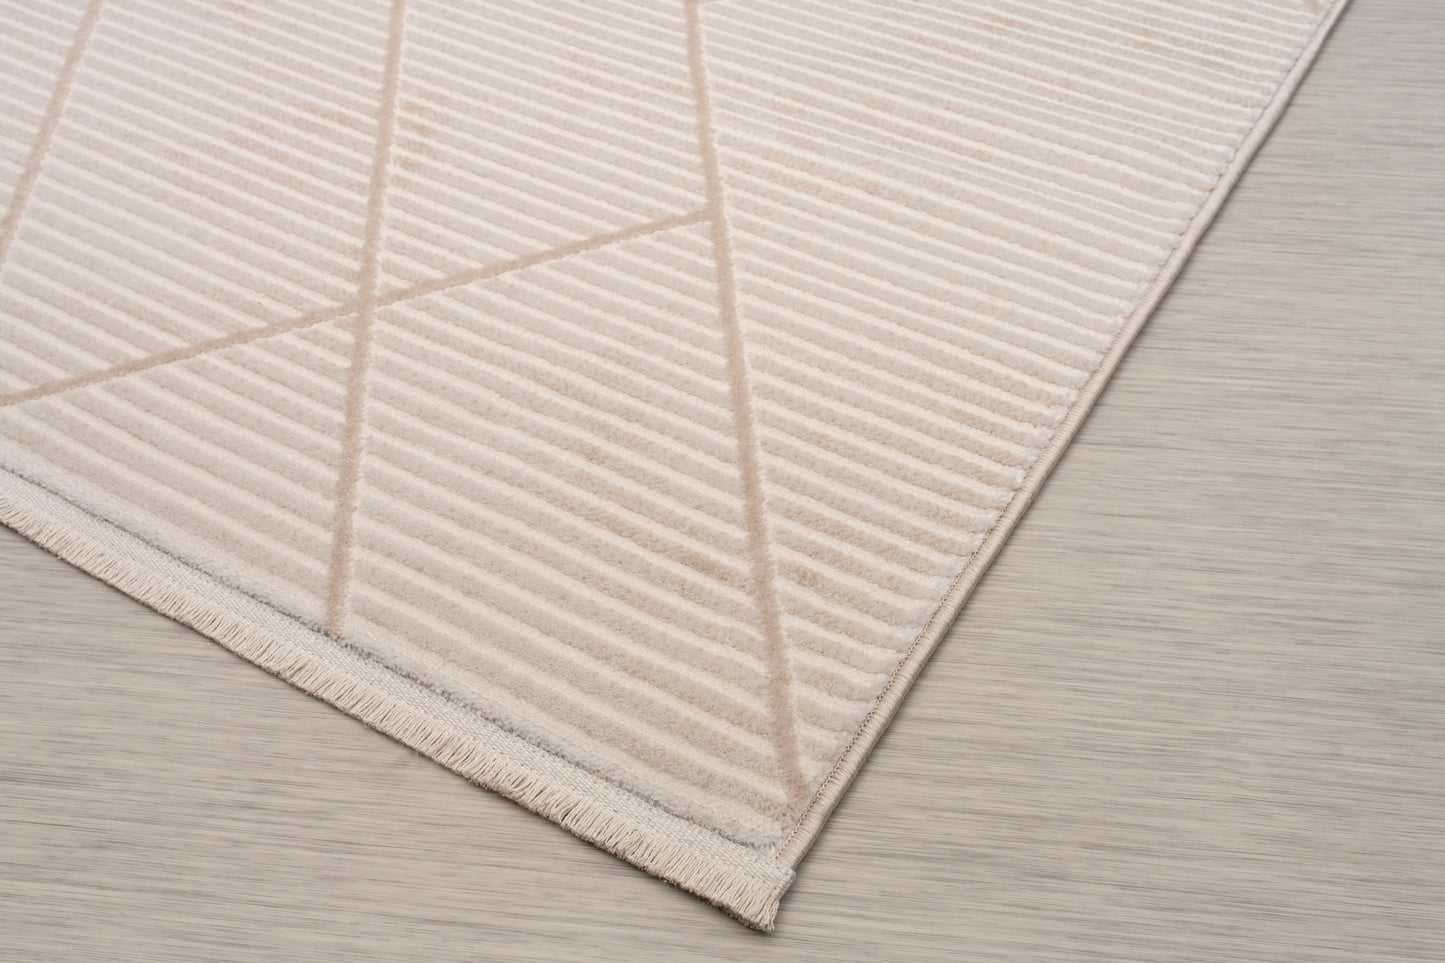 Ladole Rugs Geometric Pattern Home Decor Indoor Area Rug - Amazing Premium Carpet for Living Room, Bedroom, Dining Room, Kitchen, and Office - Cream